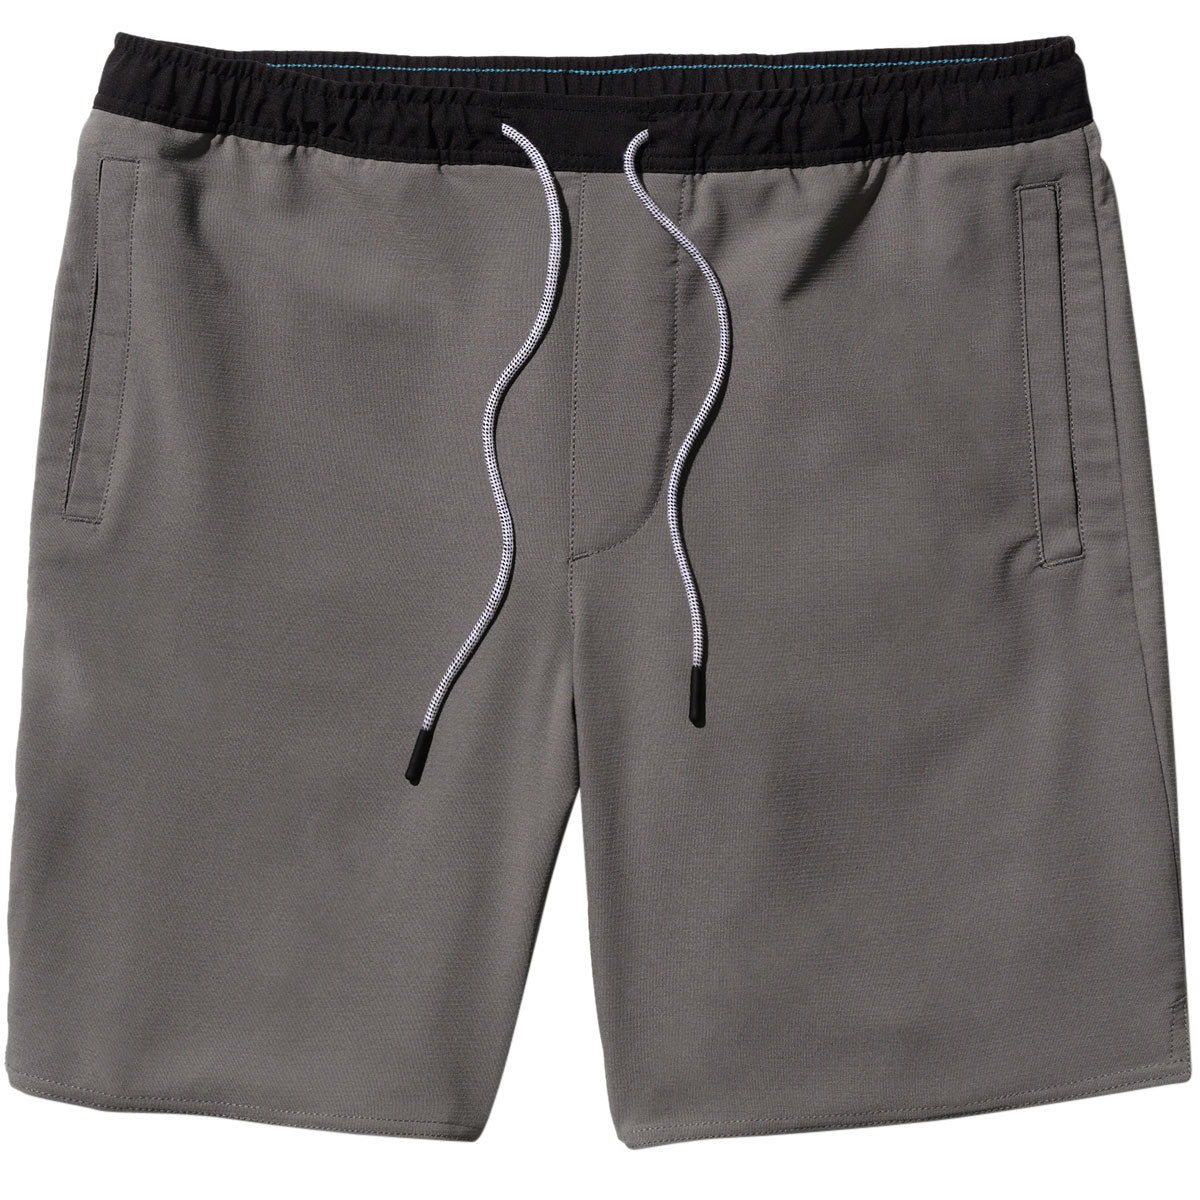 Stance Complex Shorts - Charcoal image 1